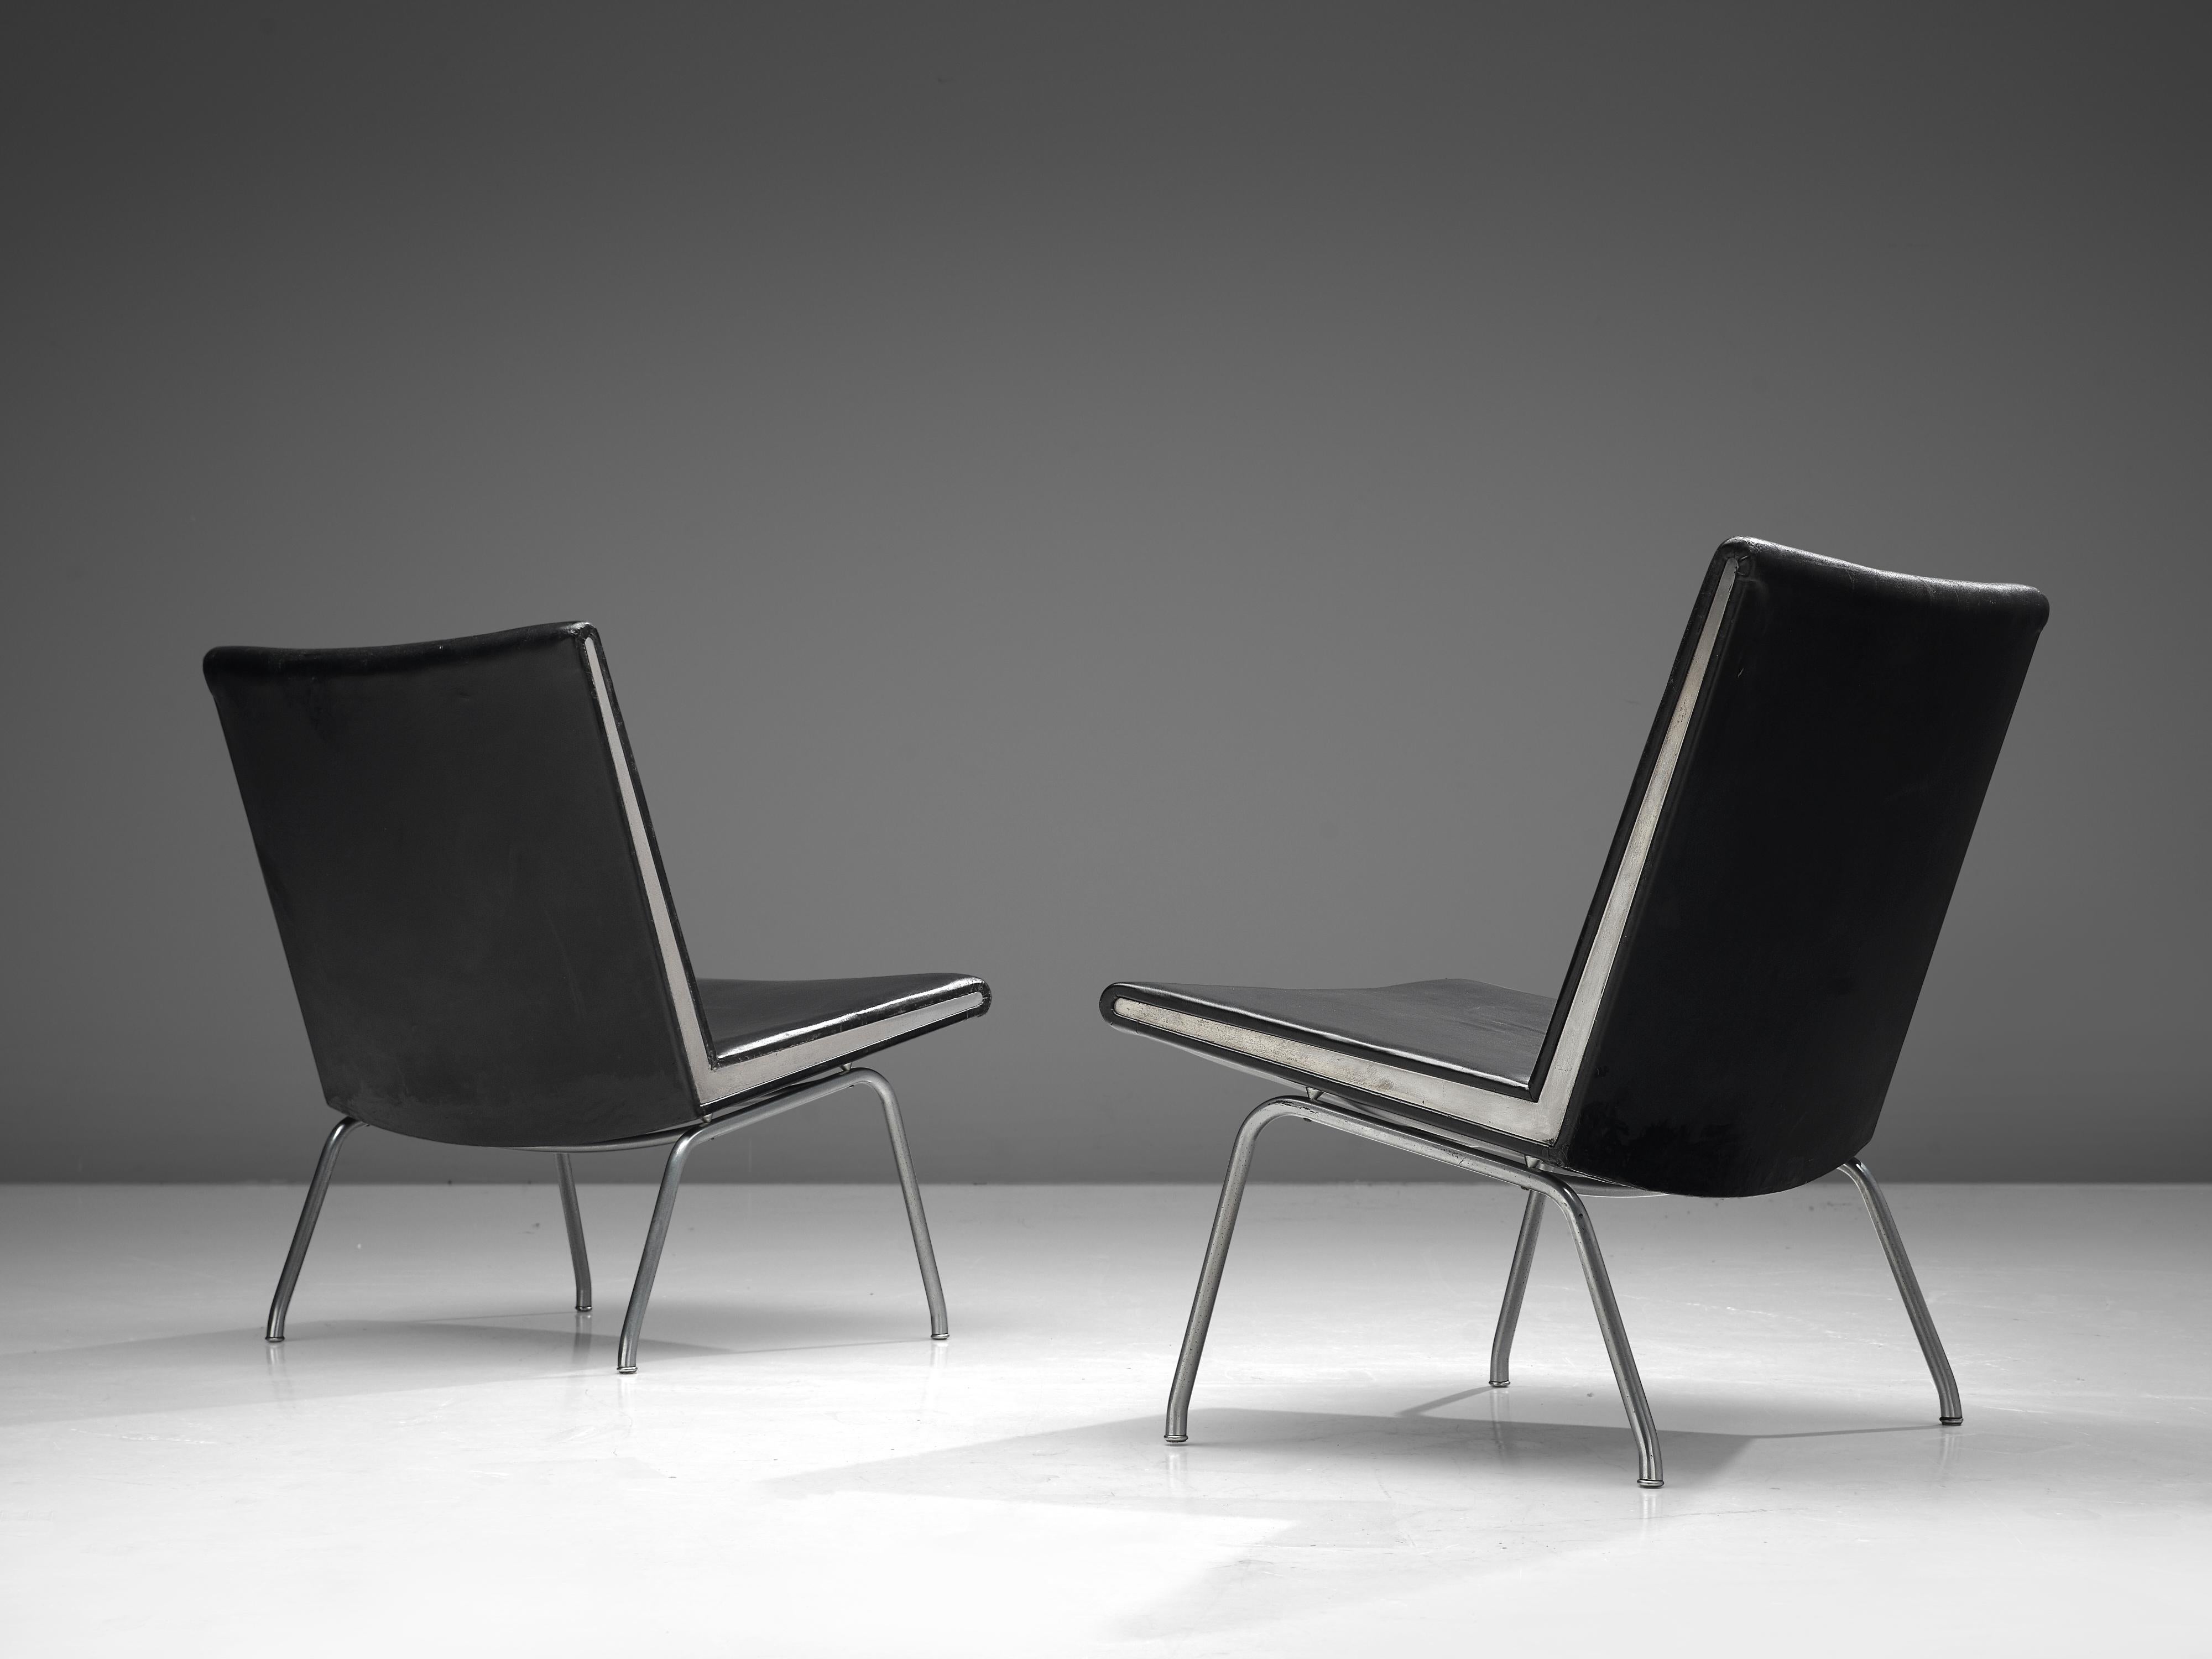 Hans J. Wegner, pair of 'Airport' lounge chairs, leather, steel, Denmark, 1958.

This pair of Airport chairs are created by Hans Wegner in 1958. Although, not specifically designed for airports, the chair thanks its name to the Copenhagen's Kastrup